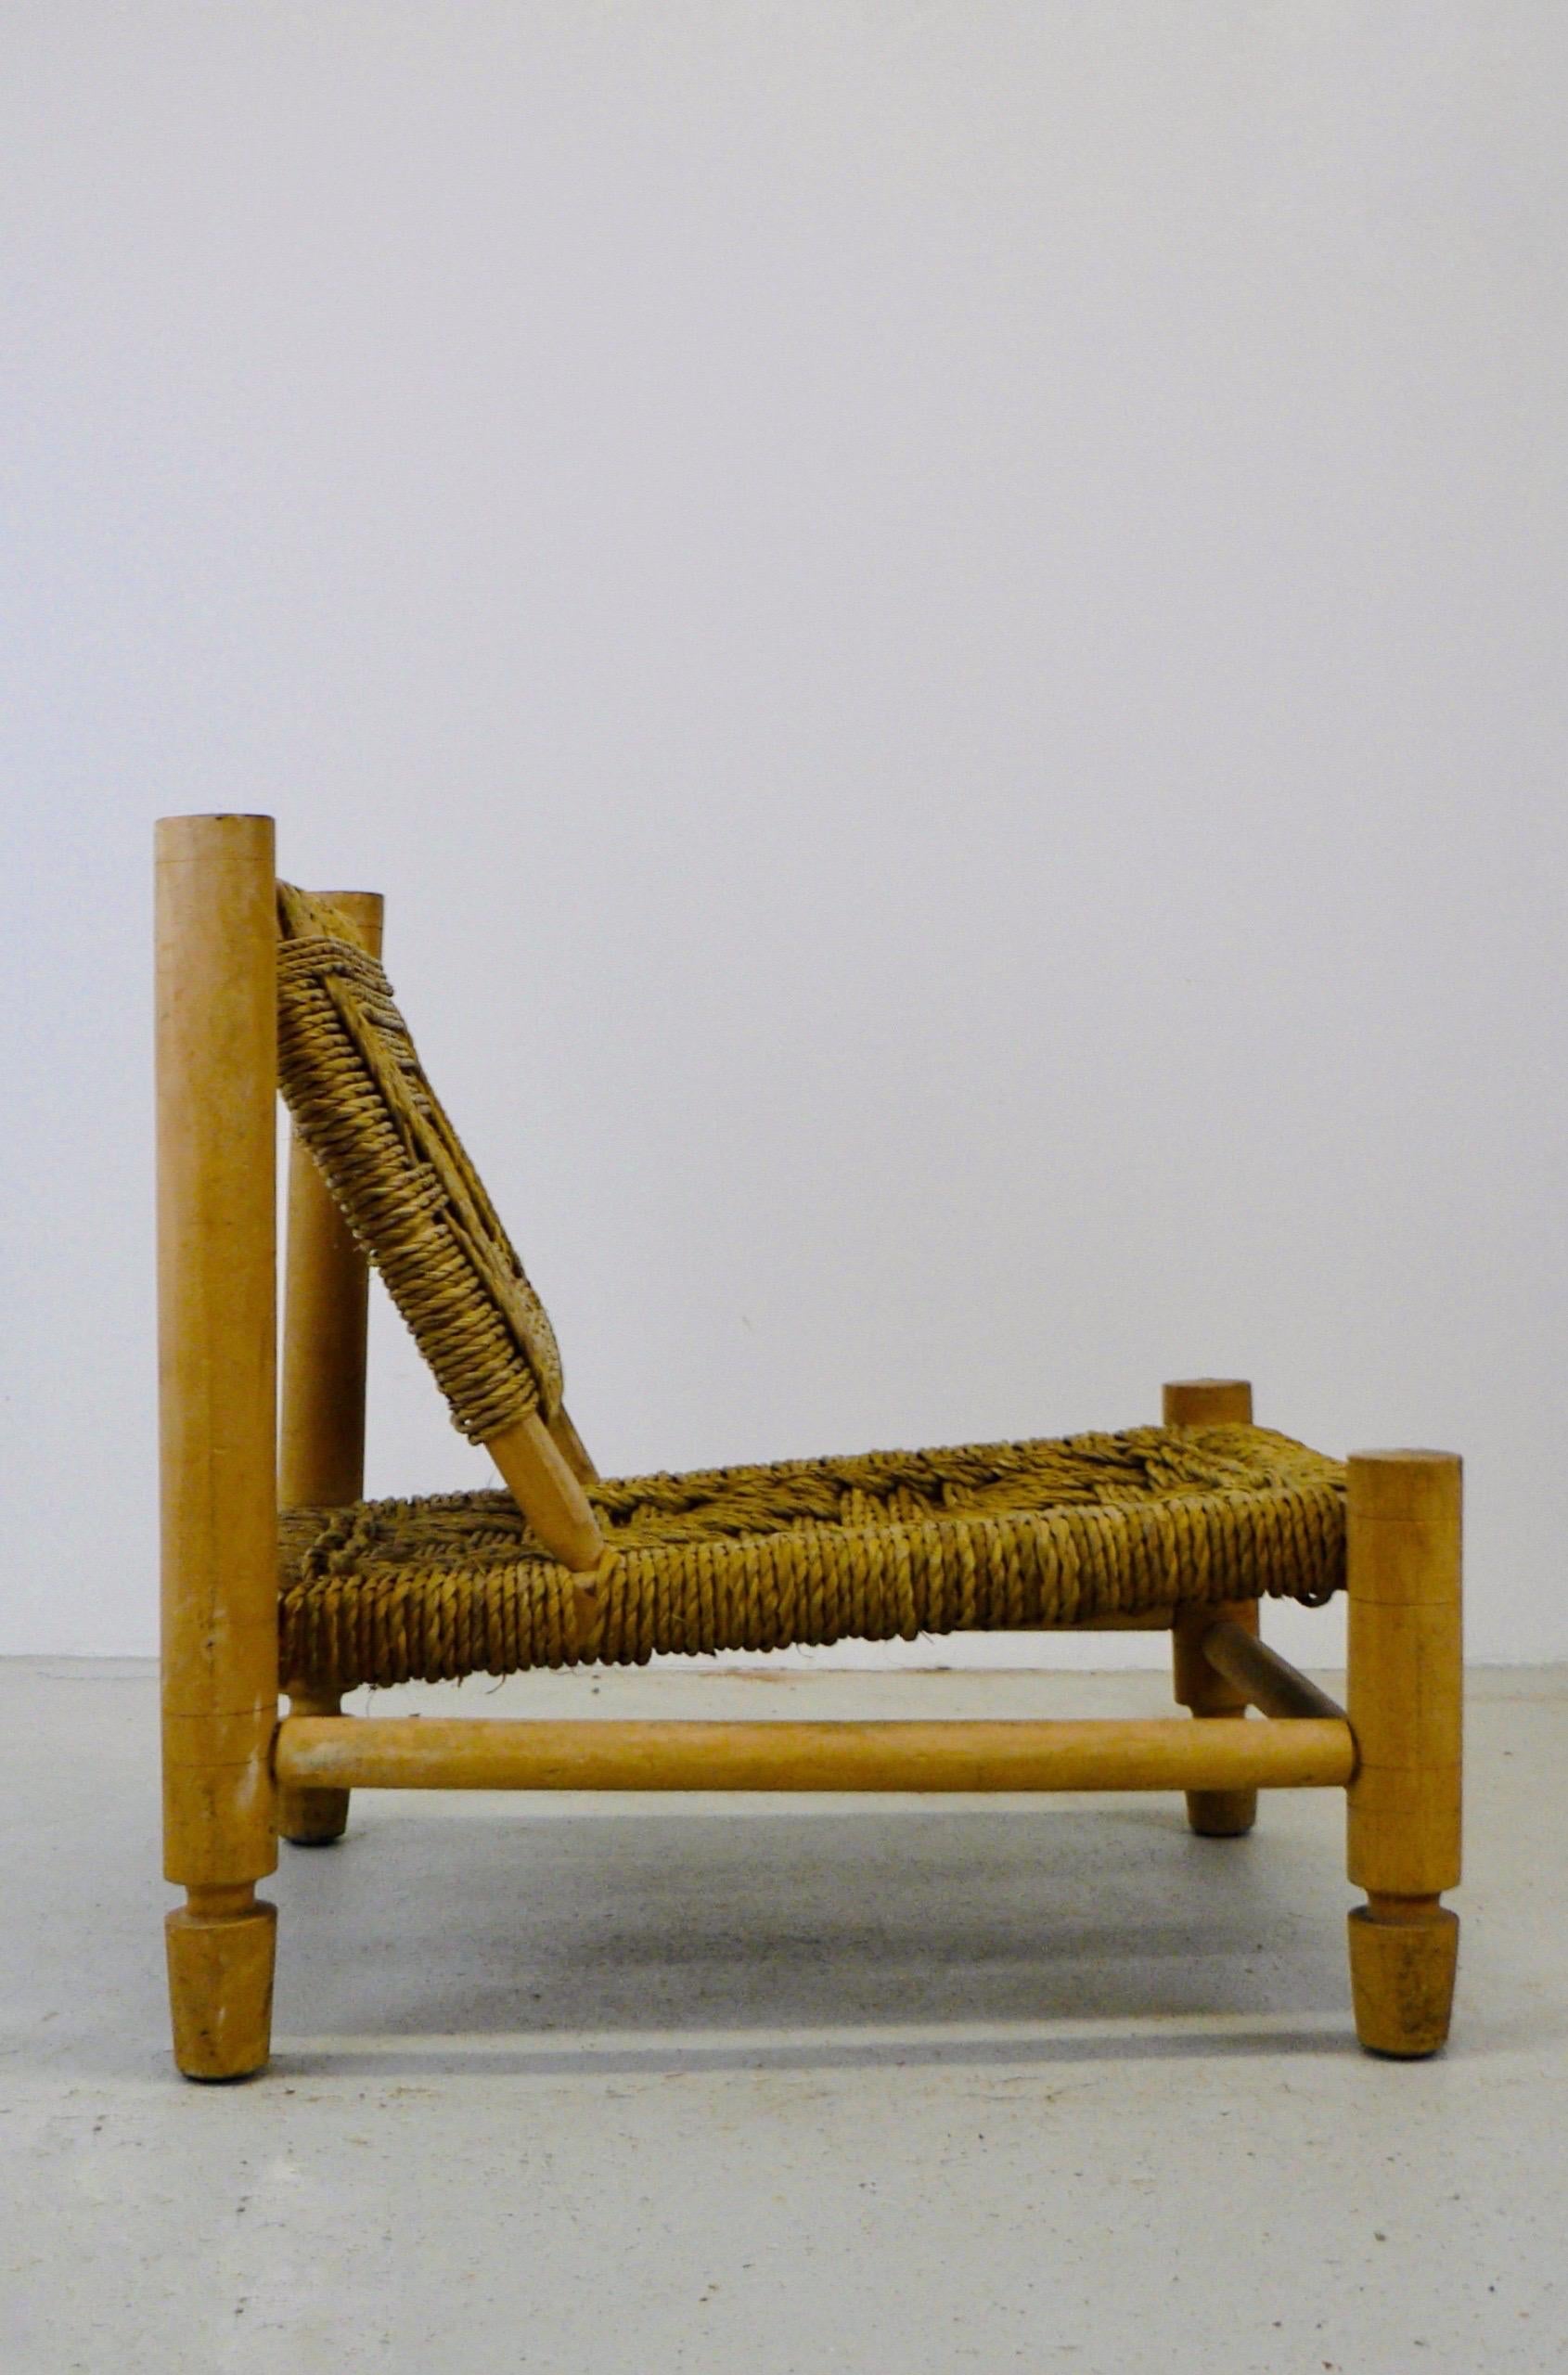 Adrien Audoux and Frida Minet lounge chair, made in France, circa 1950.
Beech frame, seat and back in abaca rope with signature woven design.

The frame and sisal are in excellent condition, without any damage. The frame is - very importantly - NOT